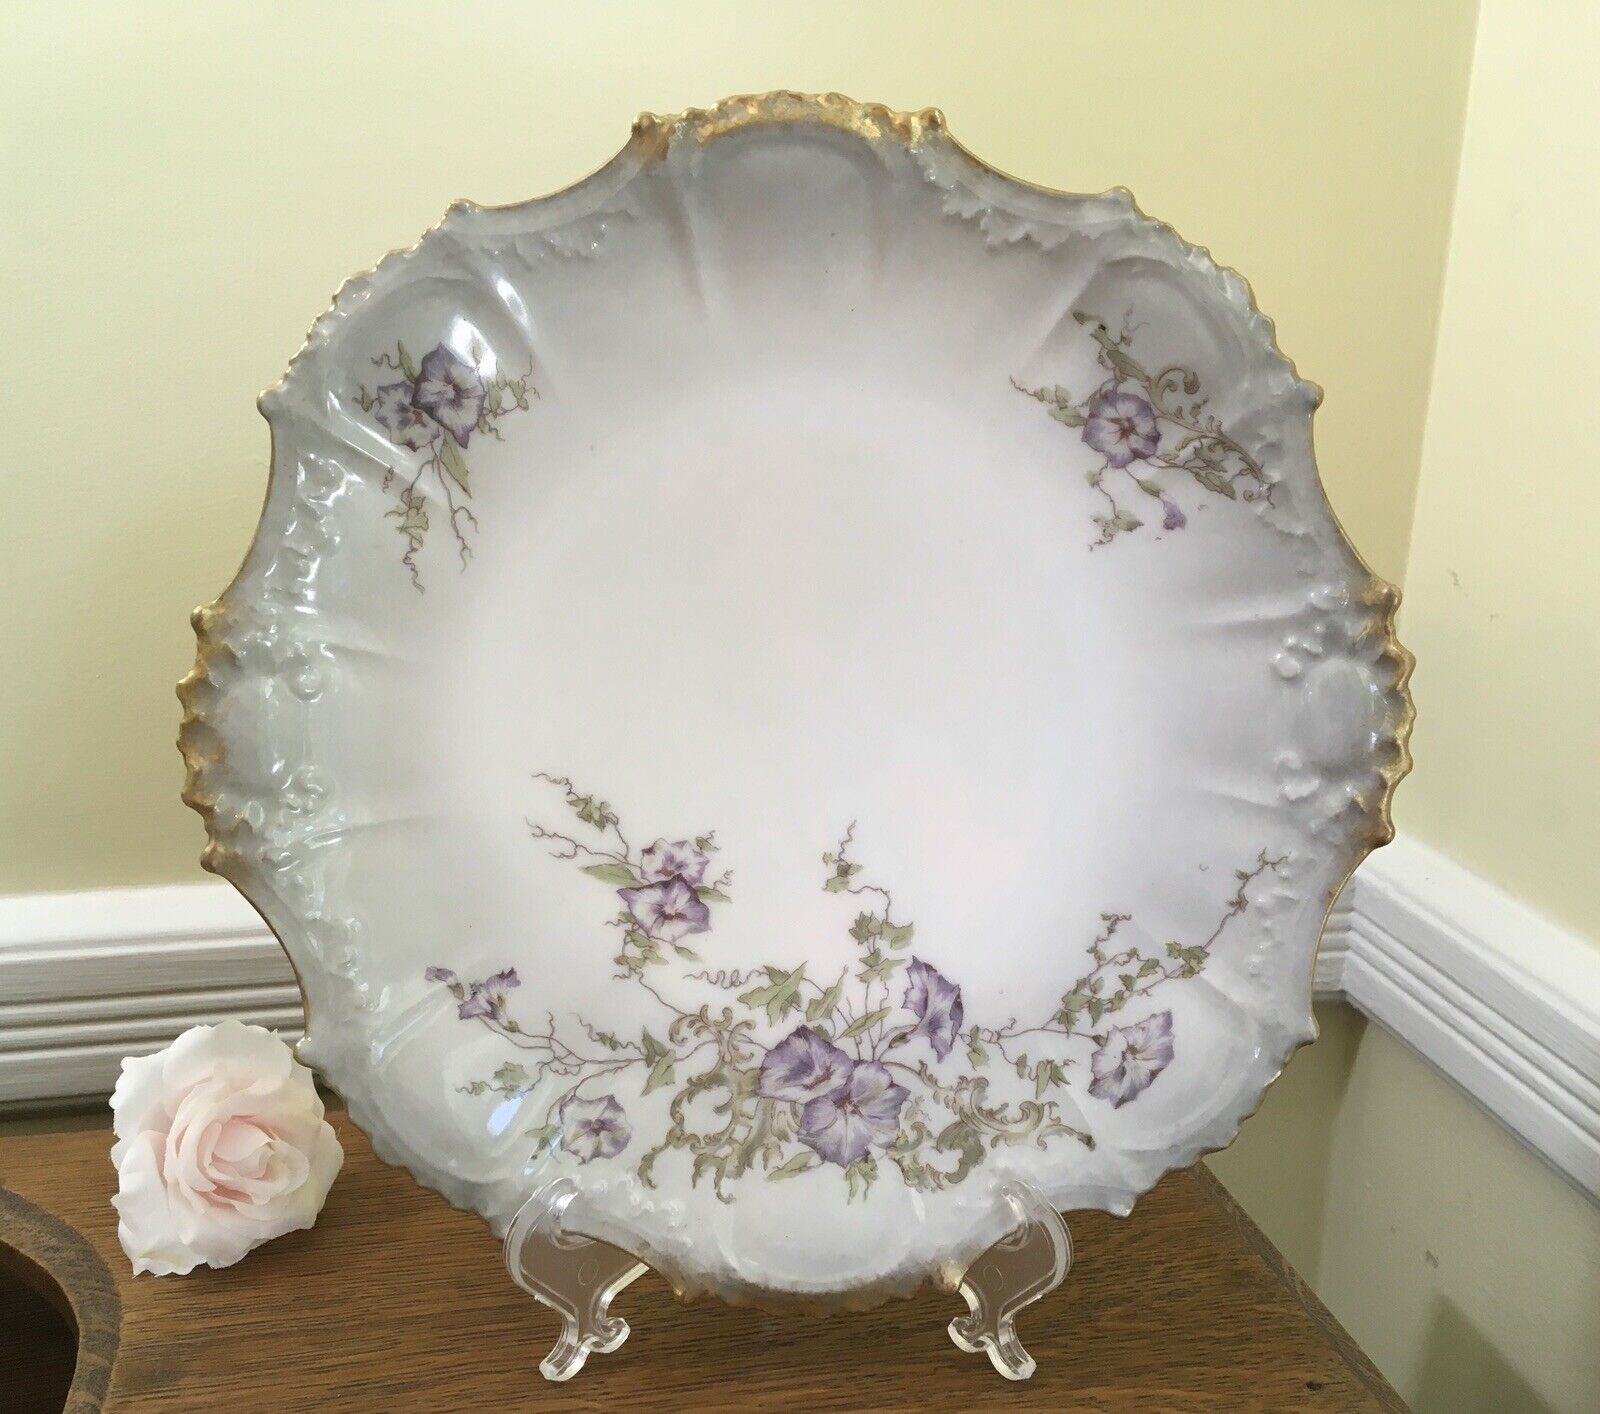 Antique 1891-1914 Coiffe Limoges Plate~Decorated with Morning Glories by L.R.L.